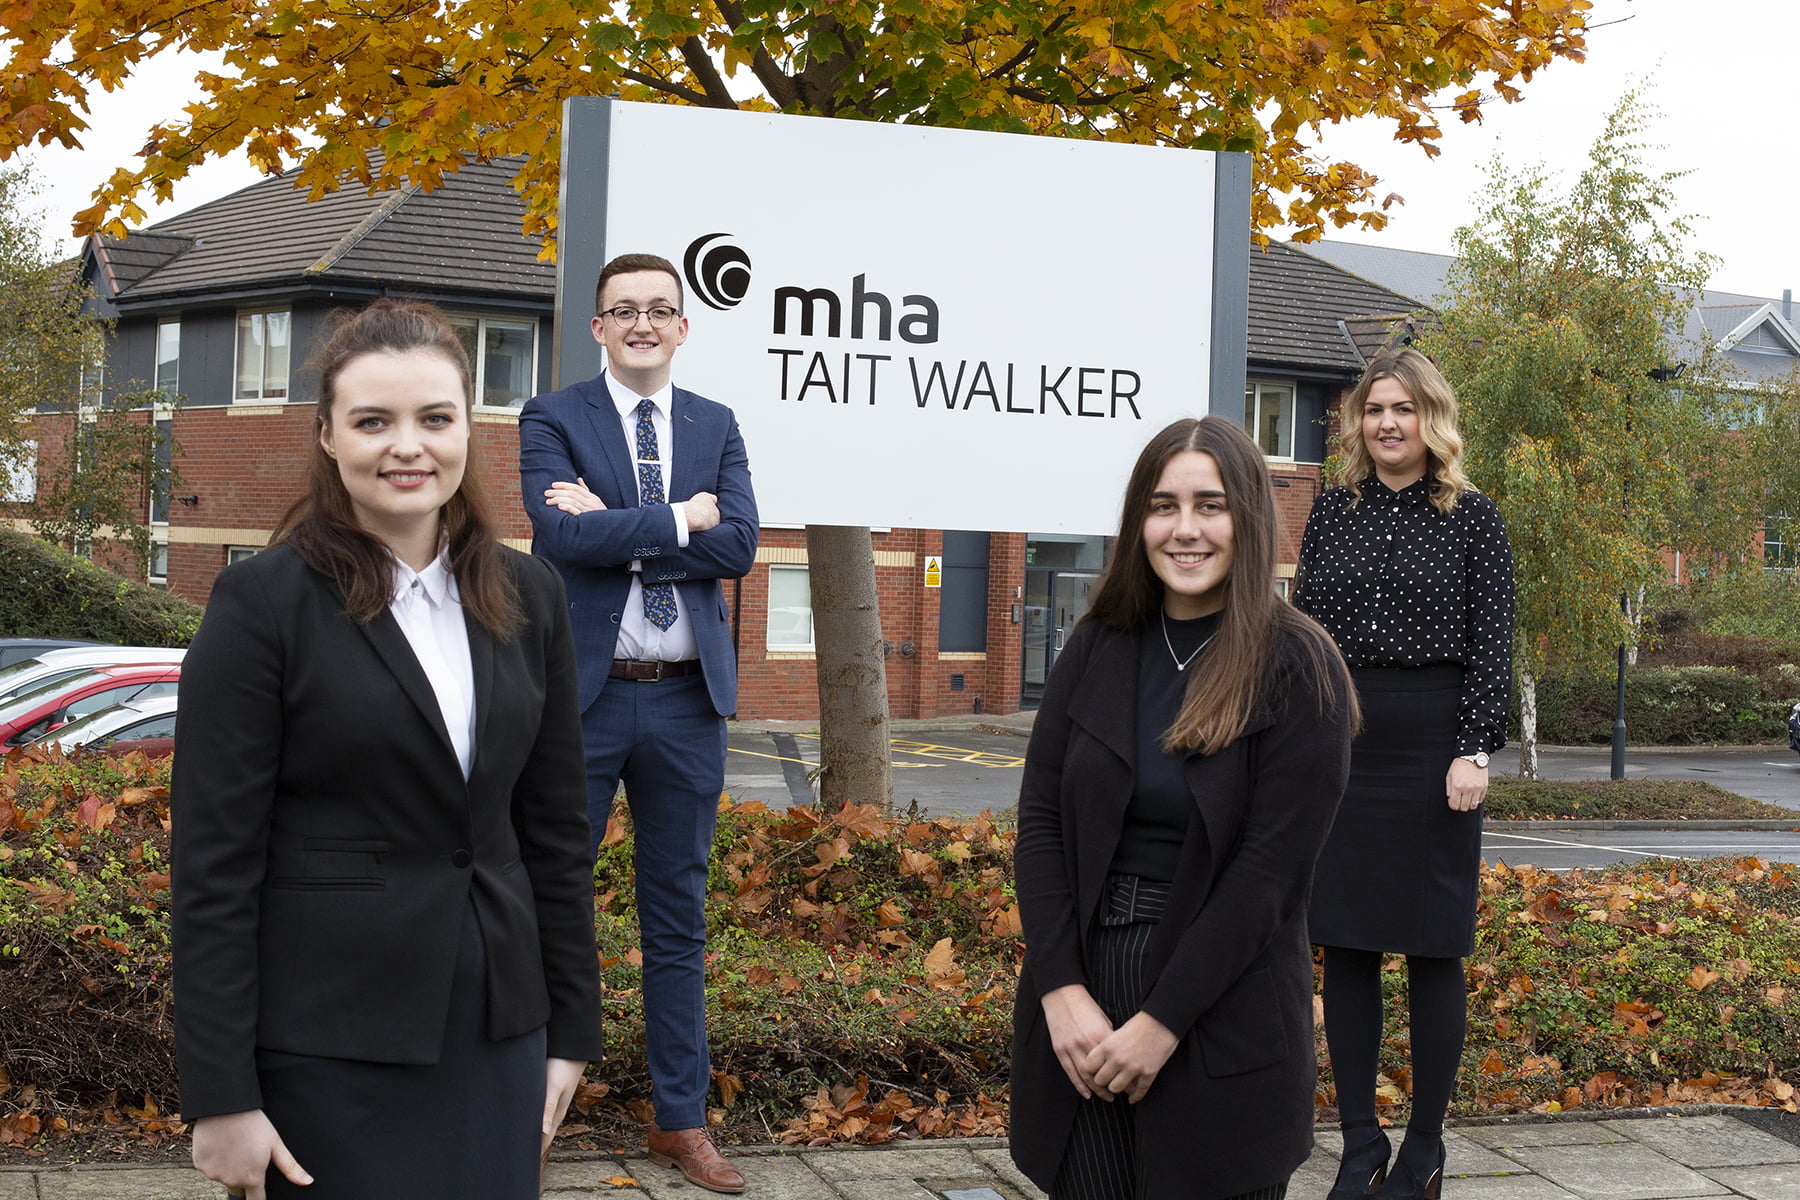 MHA TAIT WALKER WELCOMES NEW RECRUITS TO ITS TEESSIDE OFFICE